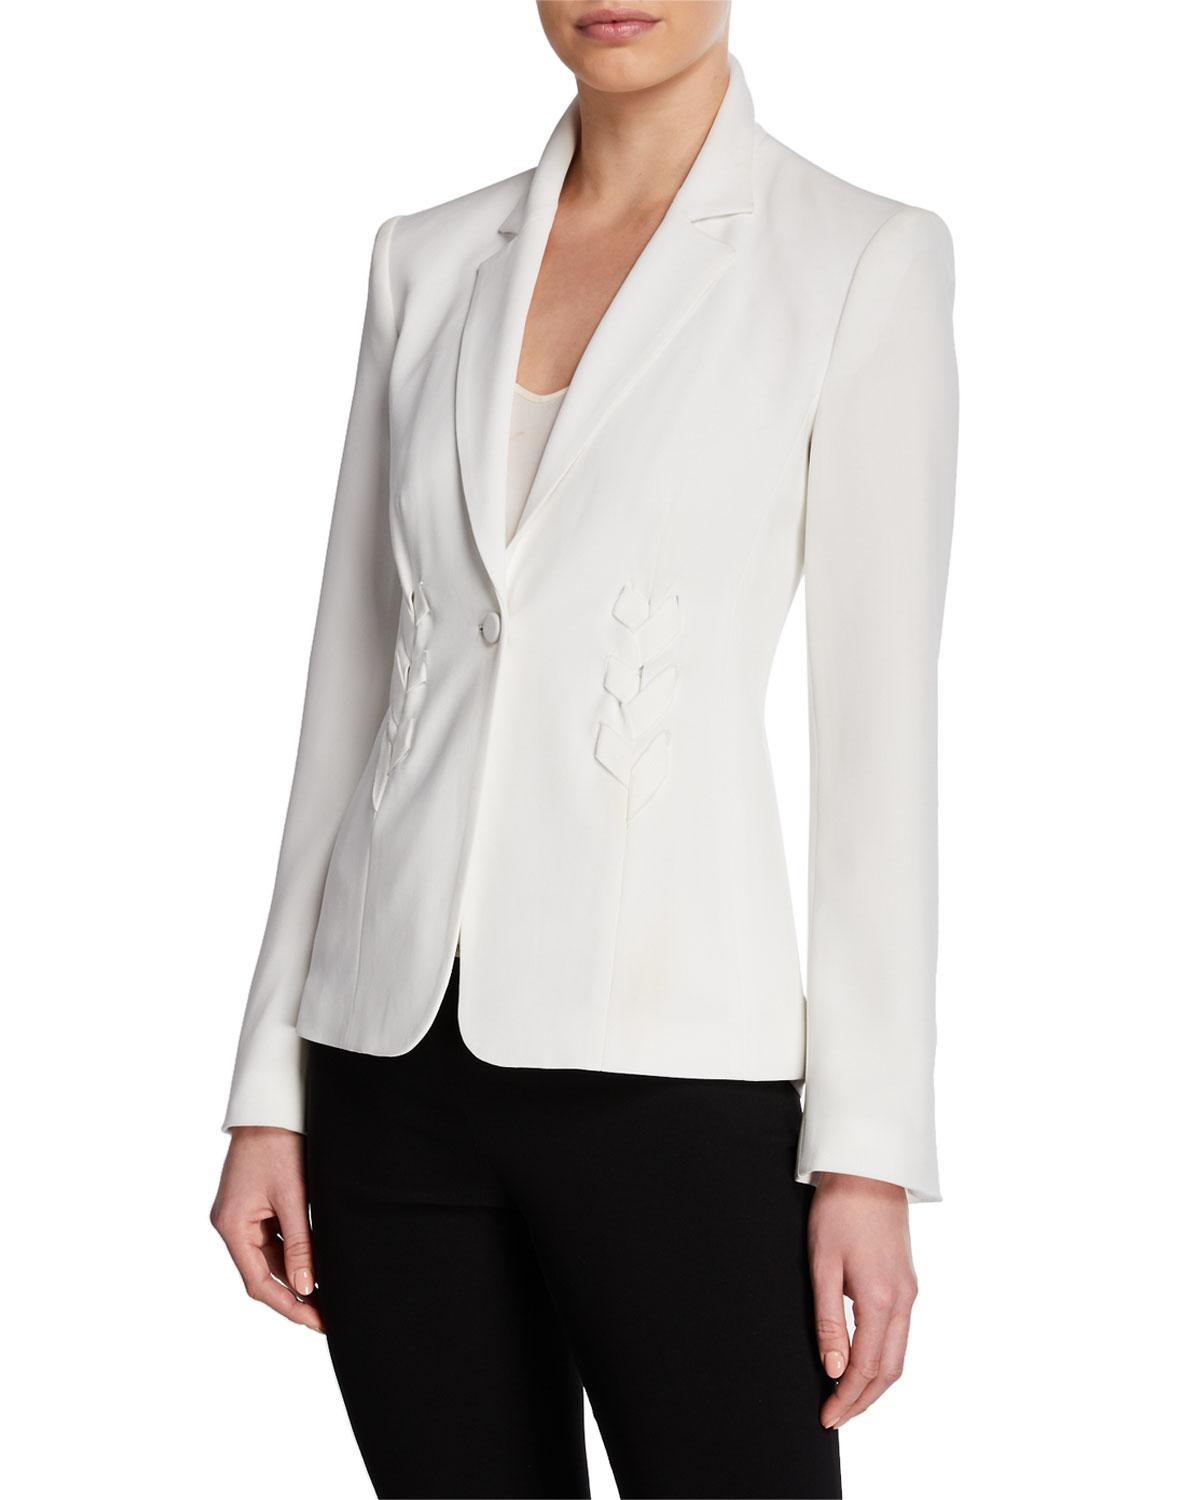 Cinq À Sept Myra One-button Blazer With Lace-up Detail in White - Lyst